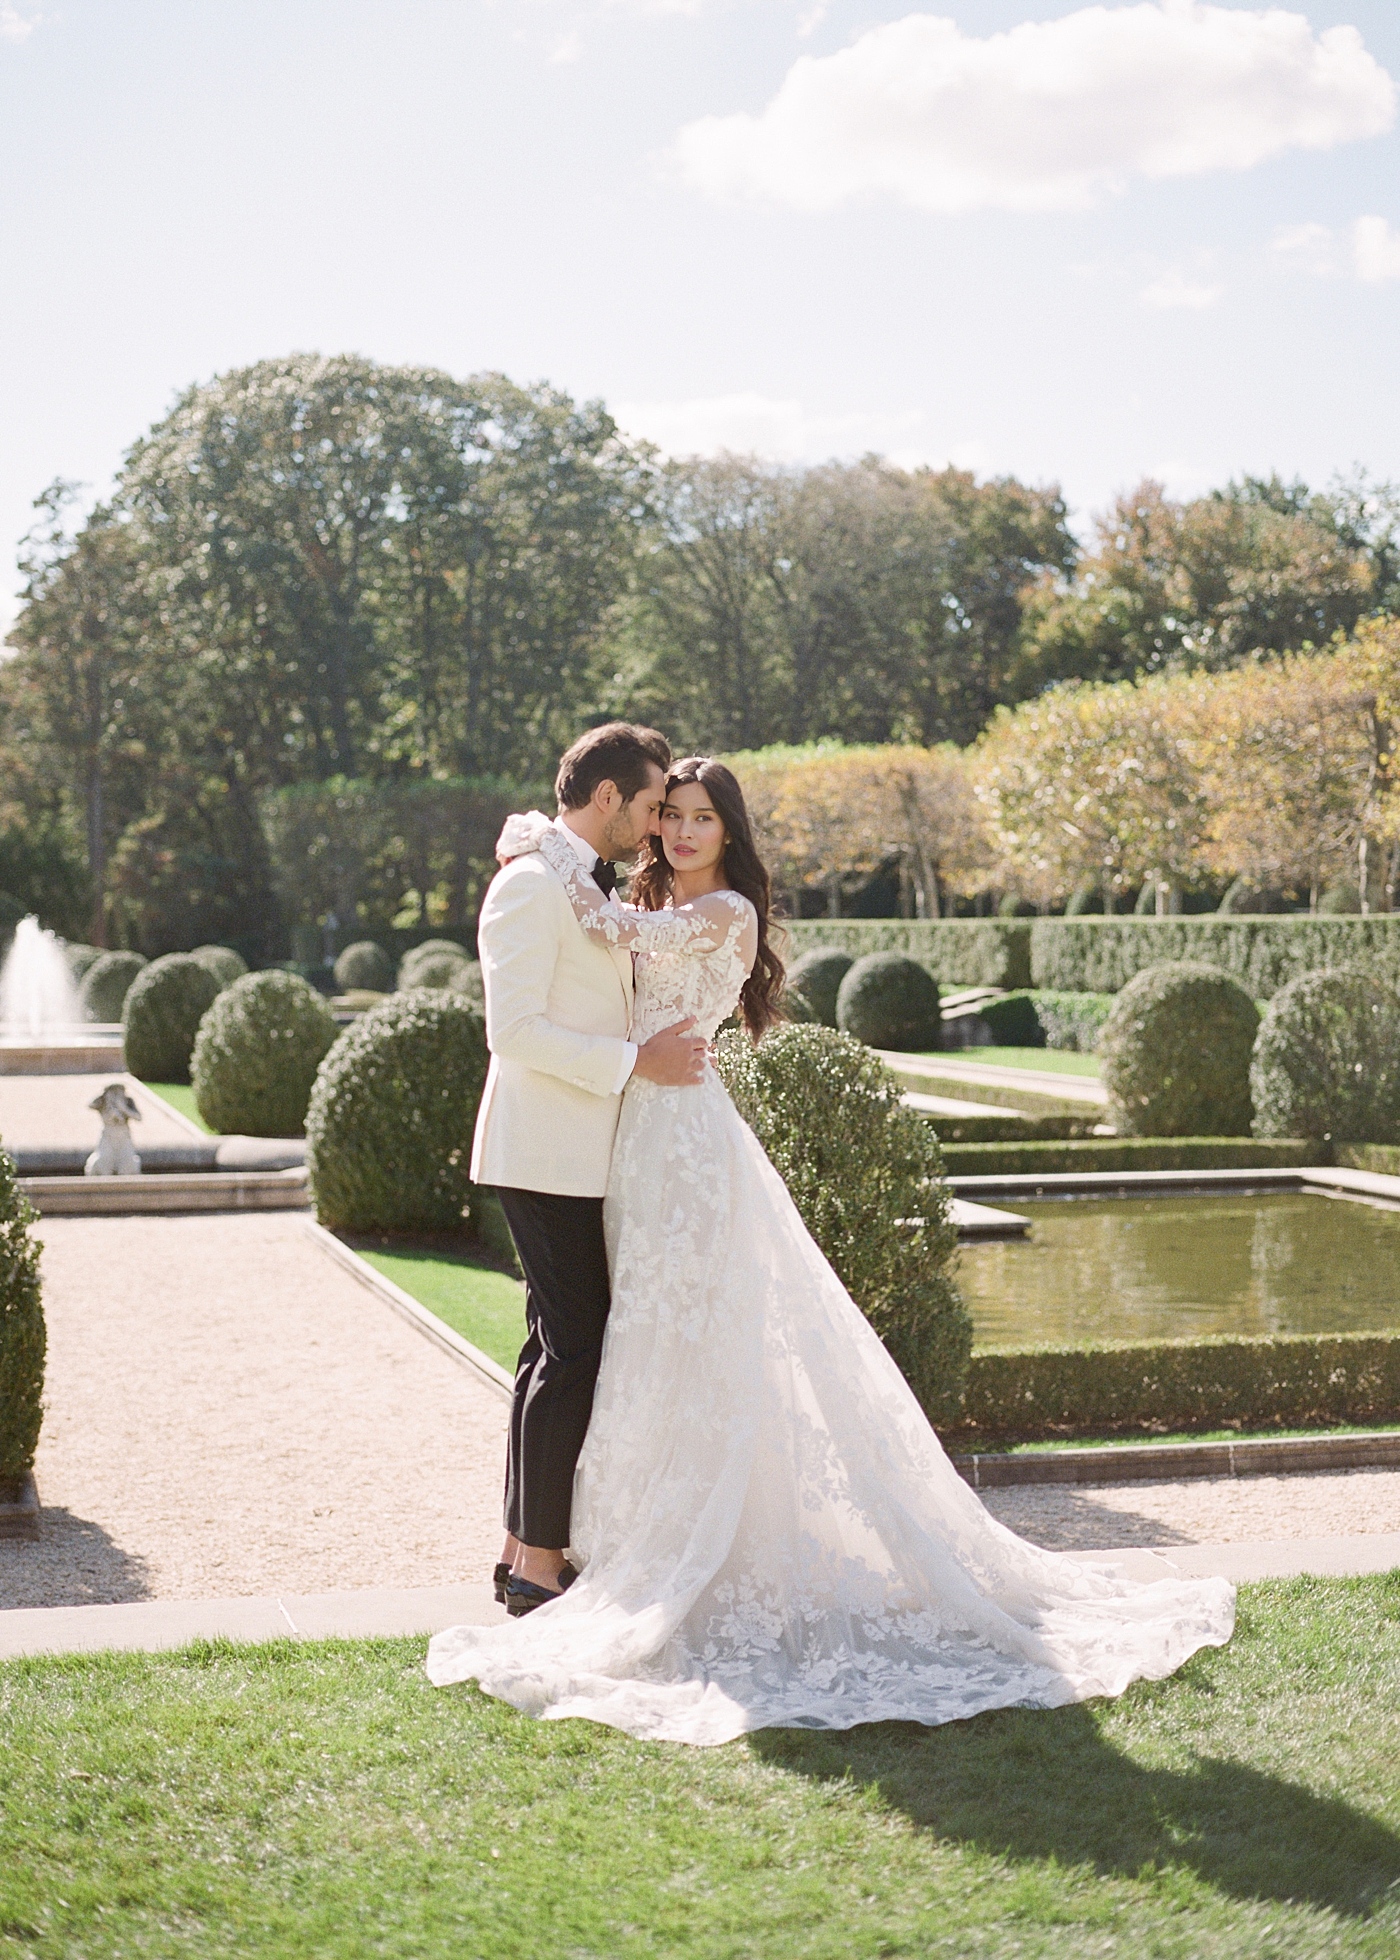 Image of a bride and groom embracing in a European garden during Oheka castle wedding | Image by Hope Helmuth Photography